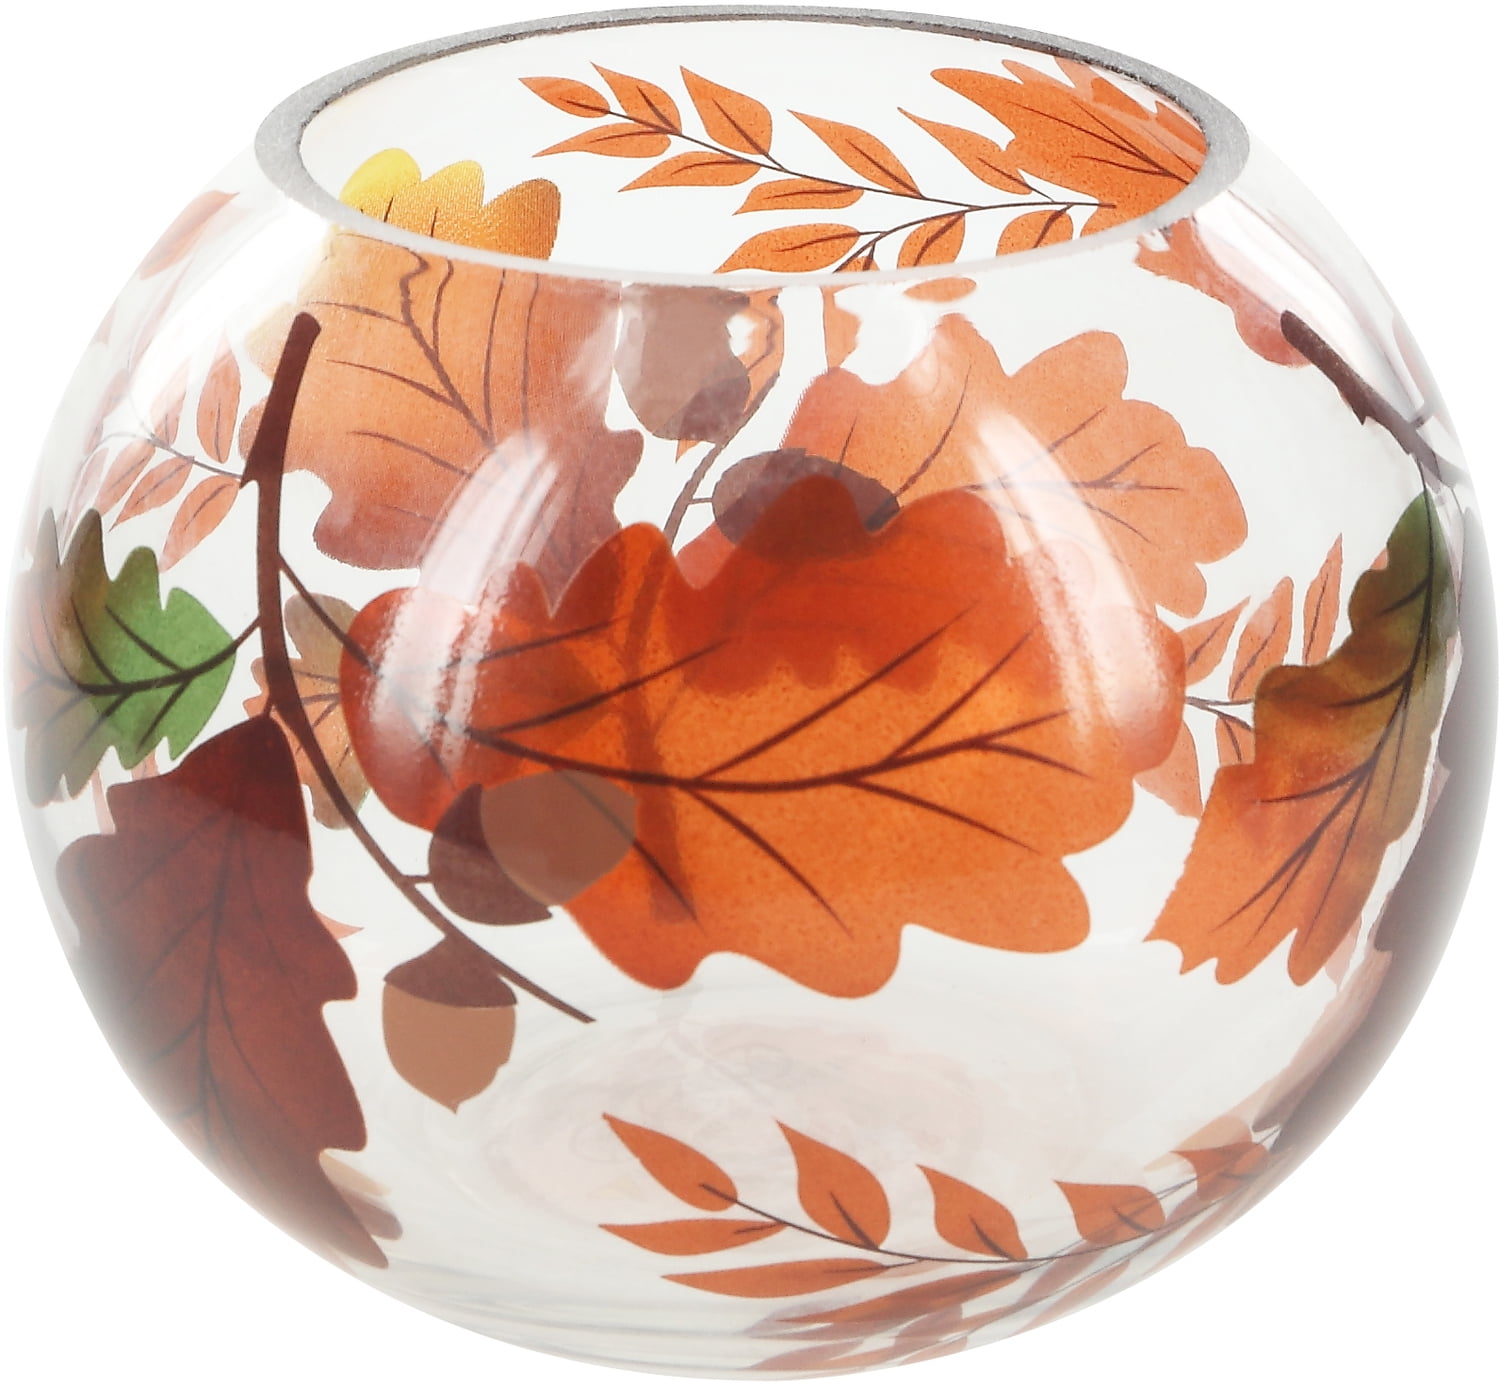 Paint Your Own Ceramic Keepsake Fall Leaves Round Candle Votive Lantern 